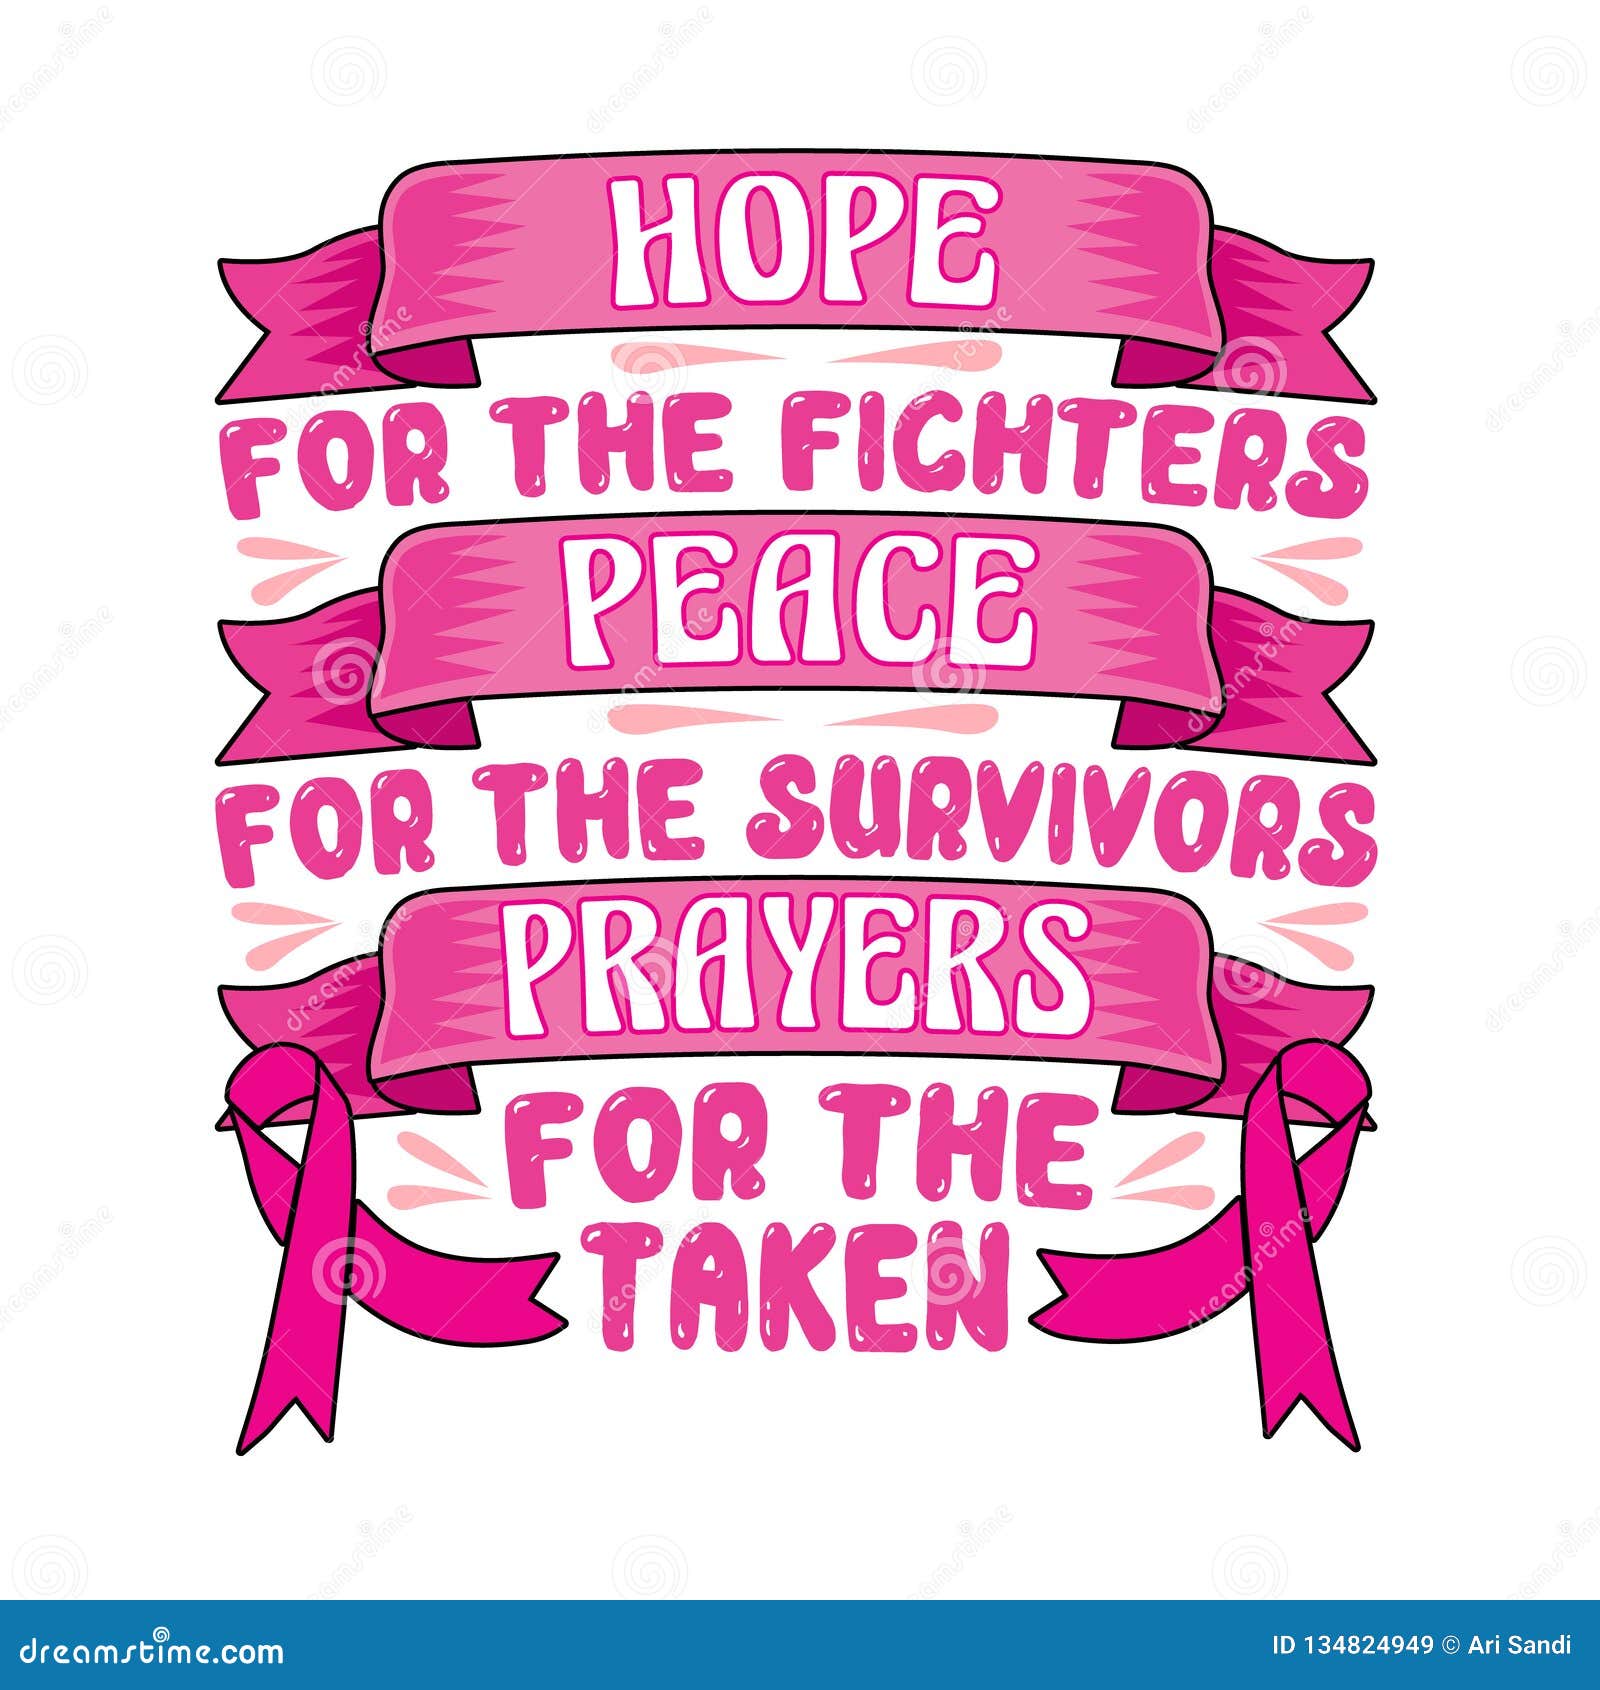 Breast Cancer Quote And Saying Best For Graphic Your Merchandise Stock Illustration Illustration Of Campaign Help 134824949